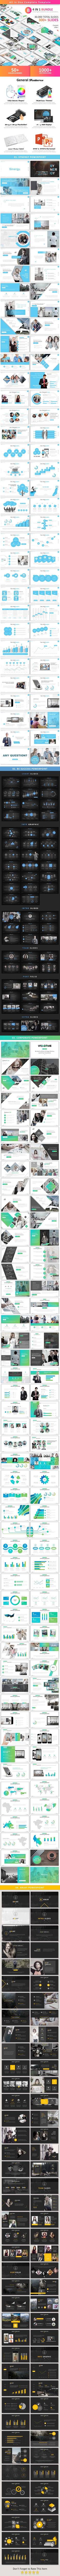 GraphicRiver 4 in 1 Creative Bundle Powerpoint 21177525